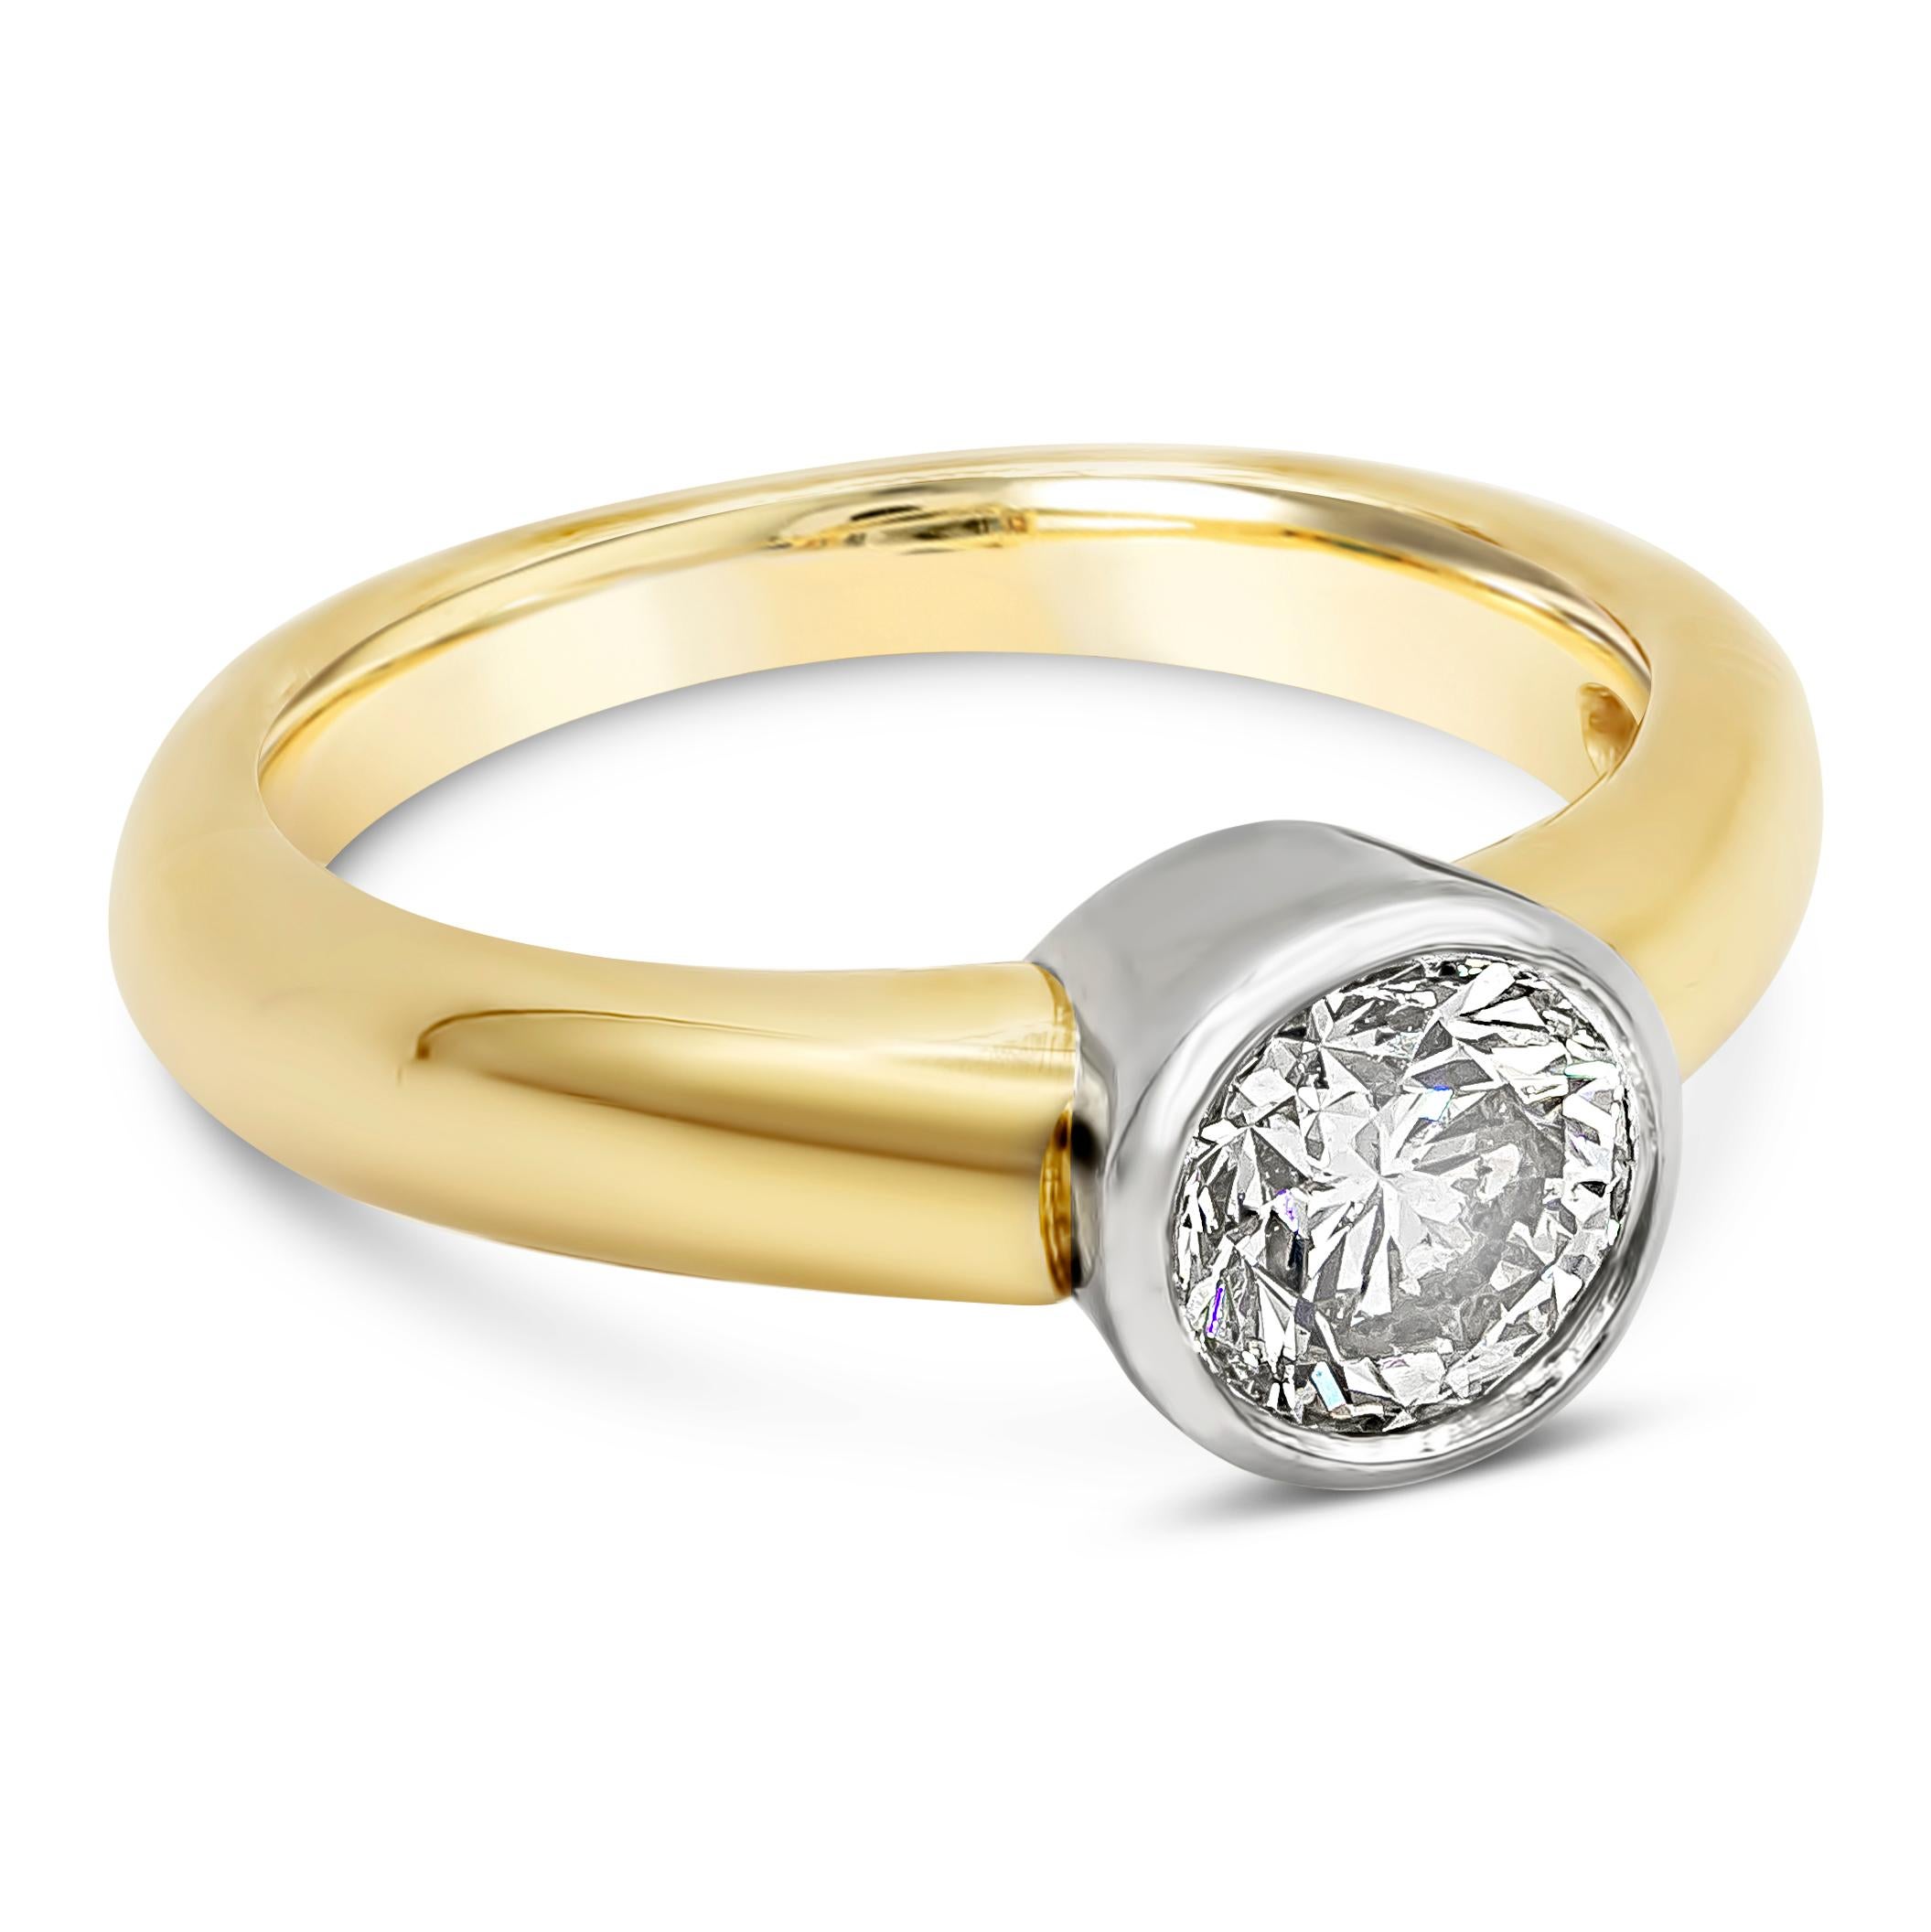 A simple solitaire engagement ring features a 1.06 carat round diamond. Bezel set in a rounded fit in 14K White Gold. Band made with 14K Yellow Gold. Size 5.75 US.

Style available in different price ranges. Prices are based on your selection.